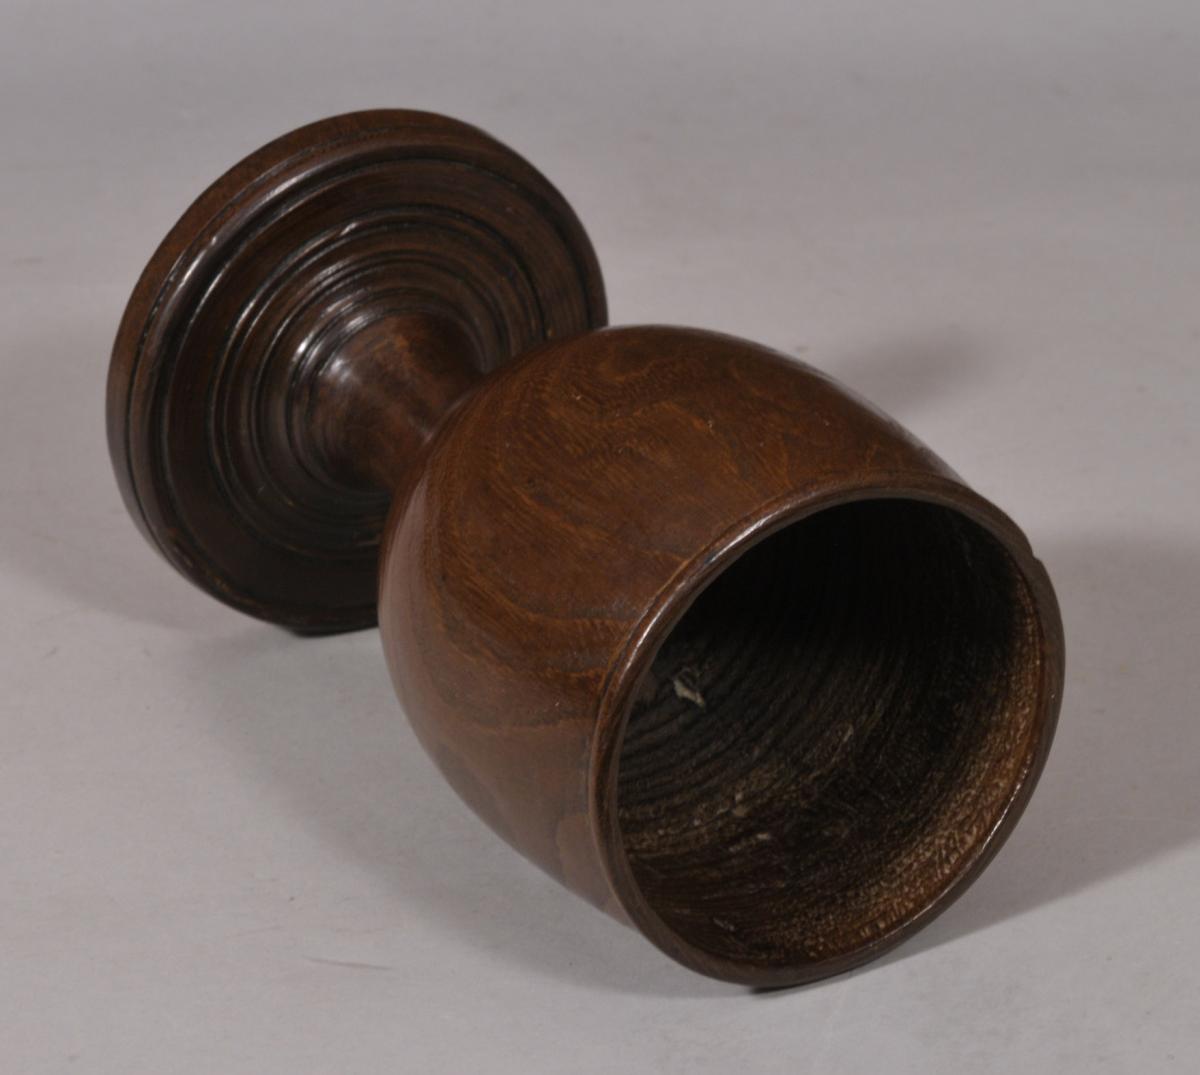 S/5114 Antique Treen Early 19th Century Elm Goblet